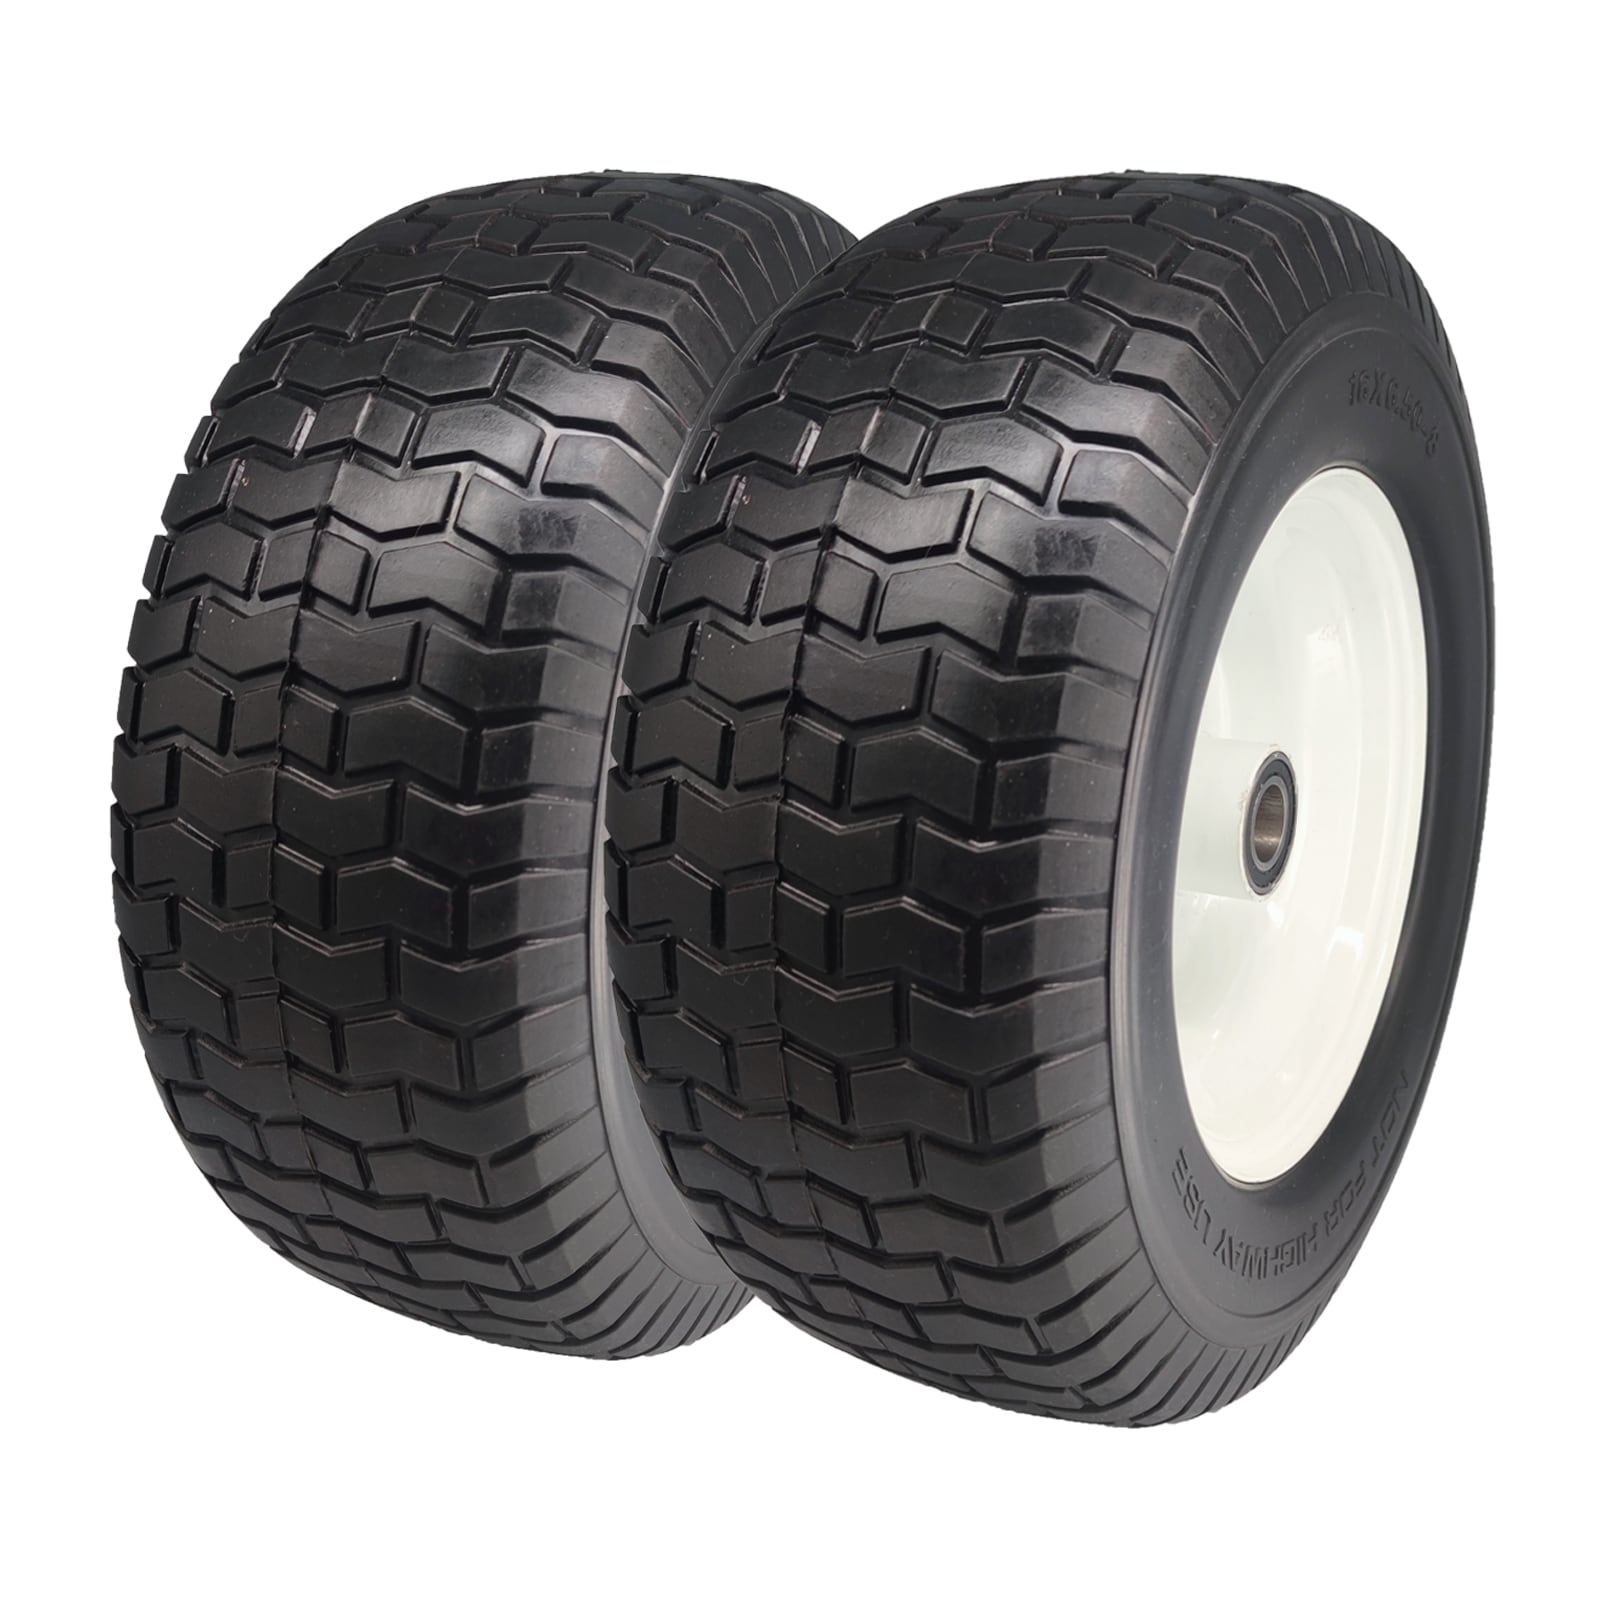 Ogracwheel 12x6-6 Flat Free Lawn Mower Tire with 3/4 and 5/8